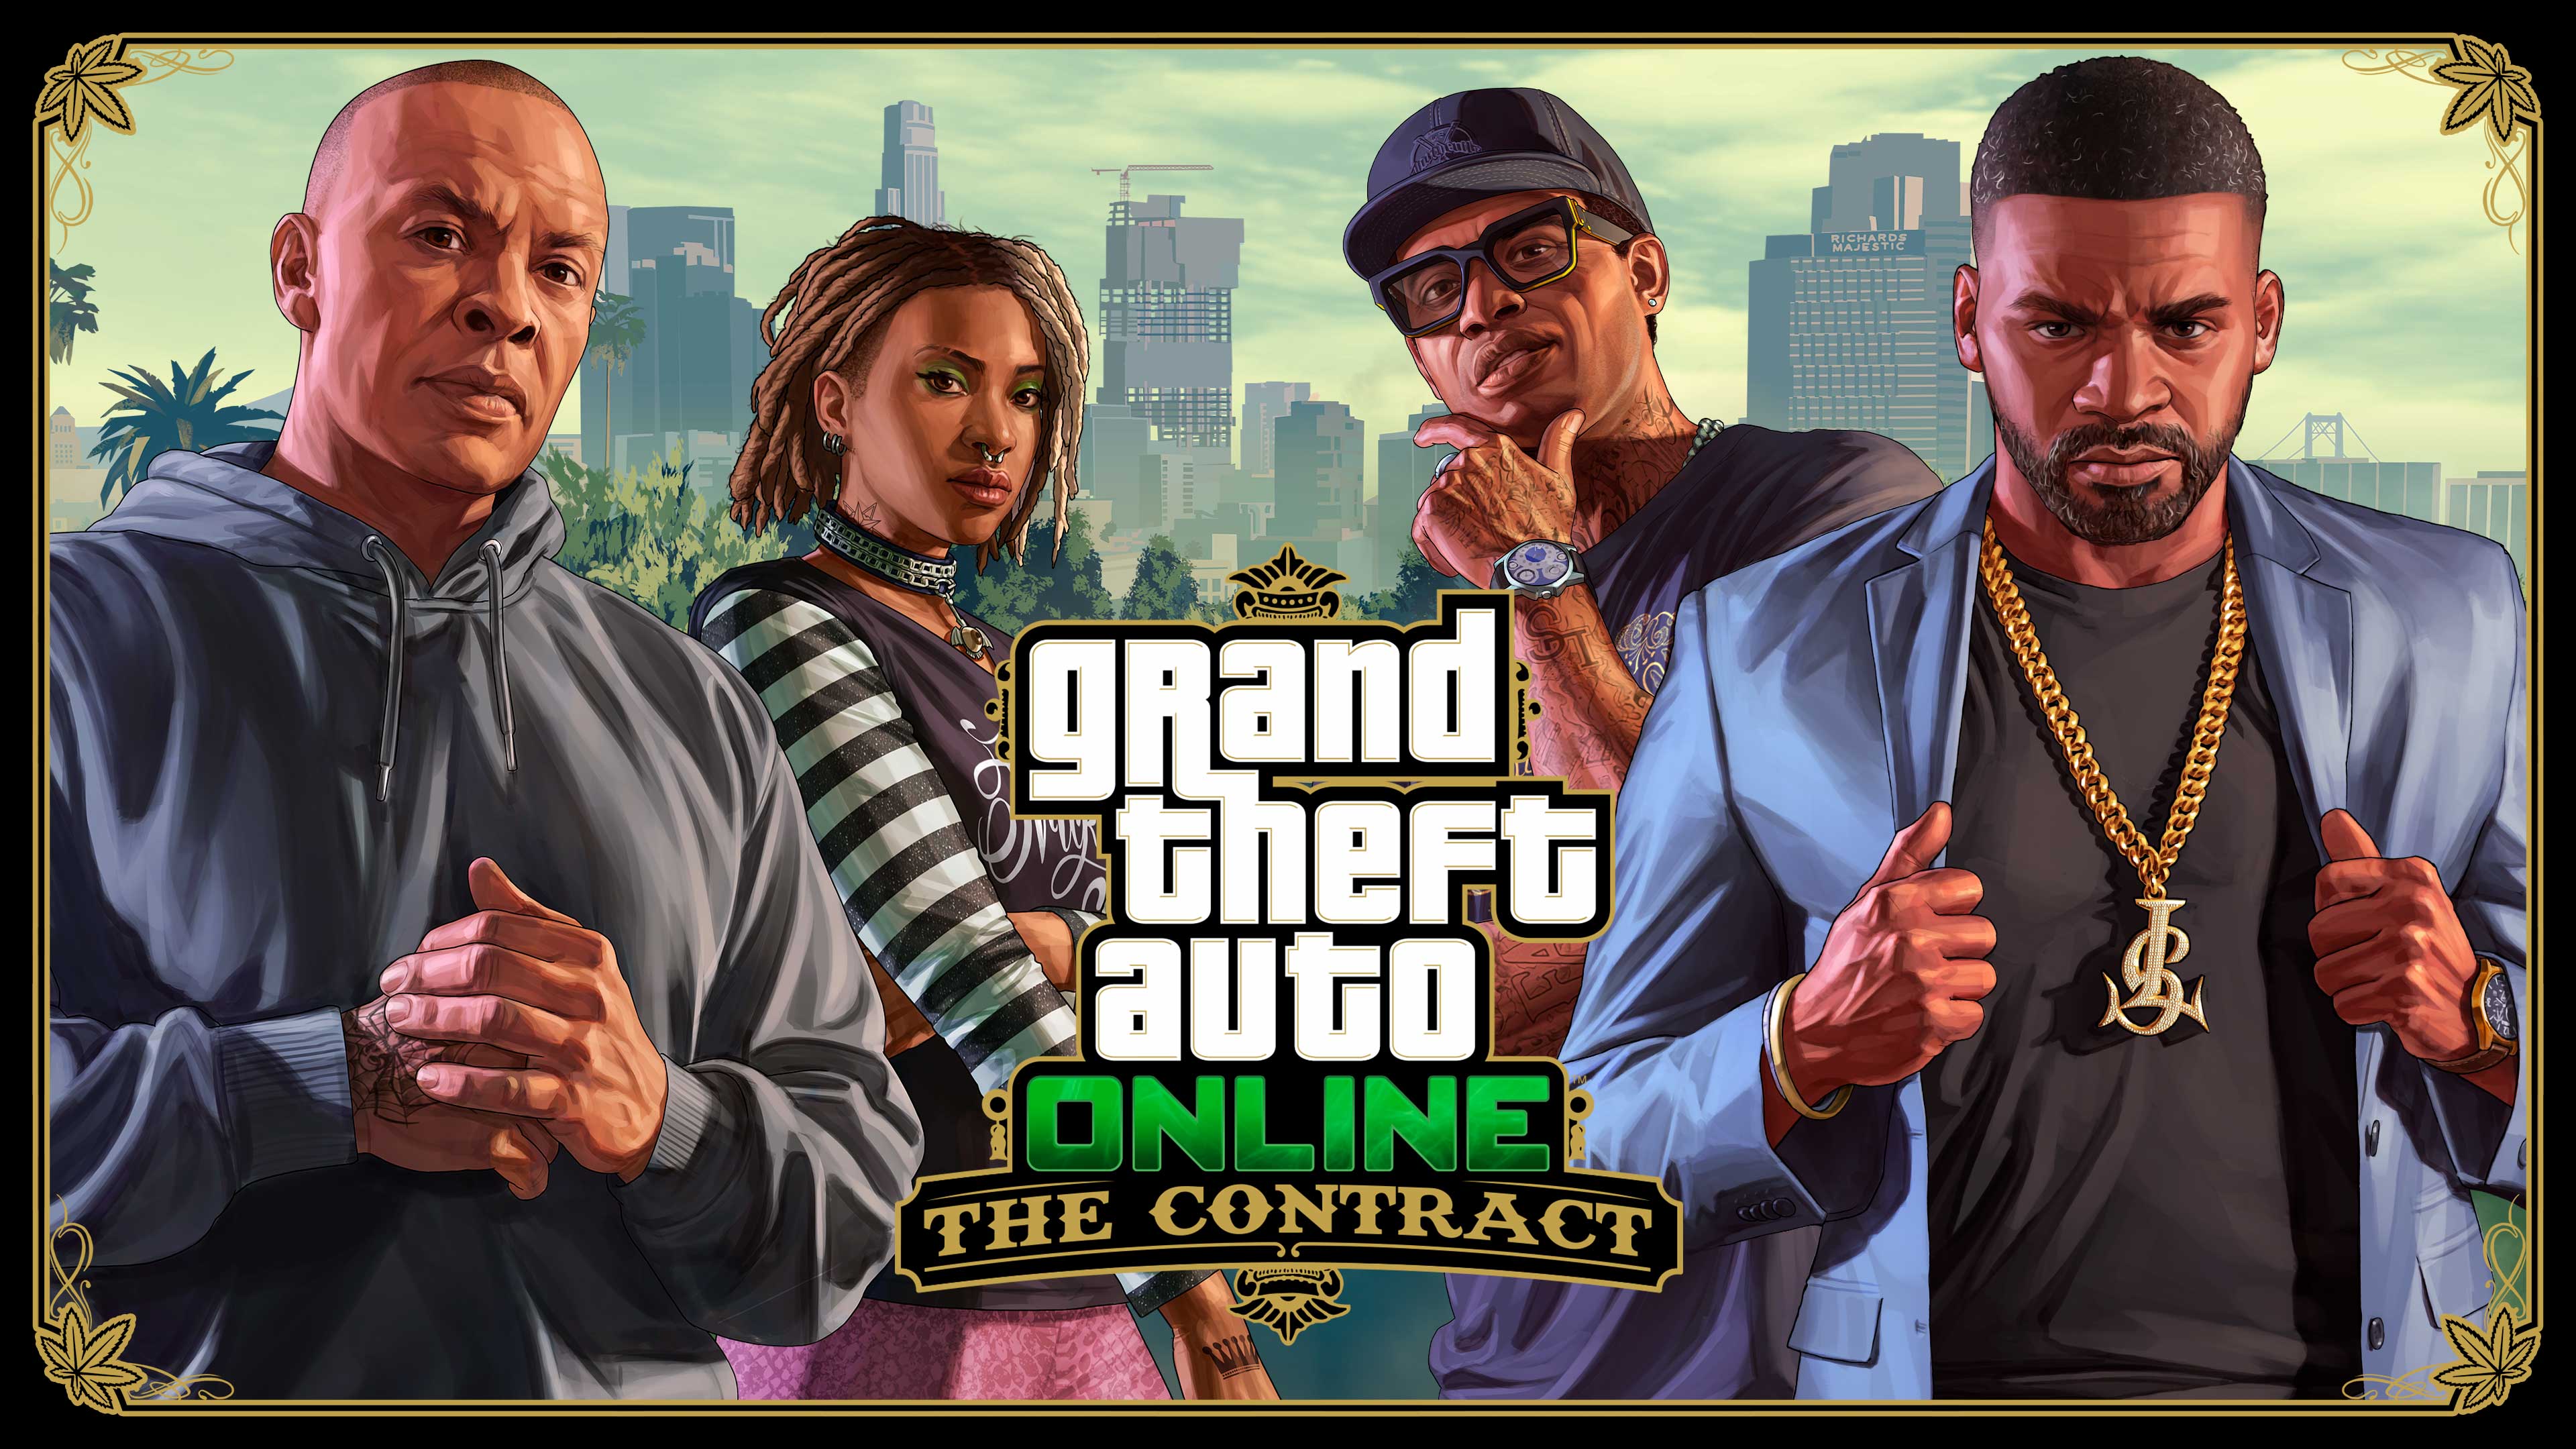 Image for GTA Online's next story update stars Dr. Dre and GTA 5's Franklin